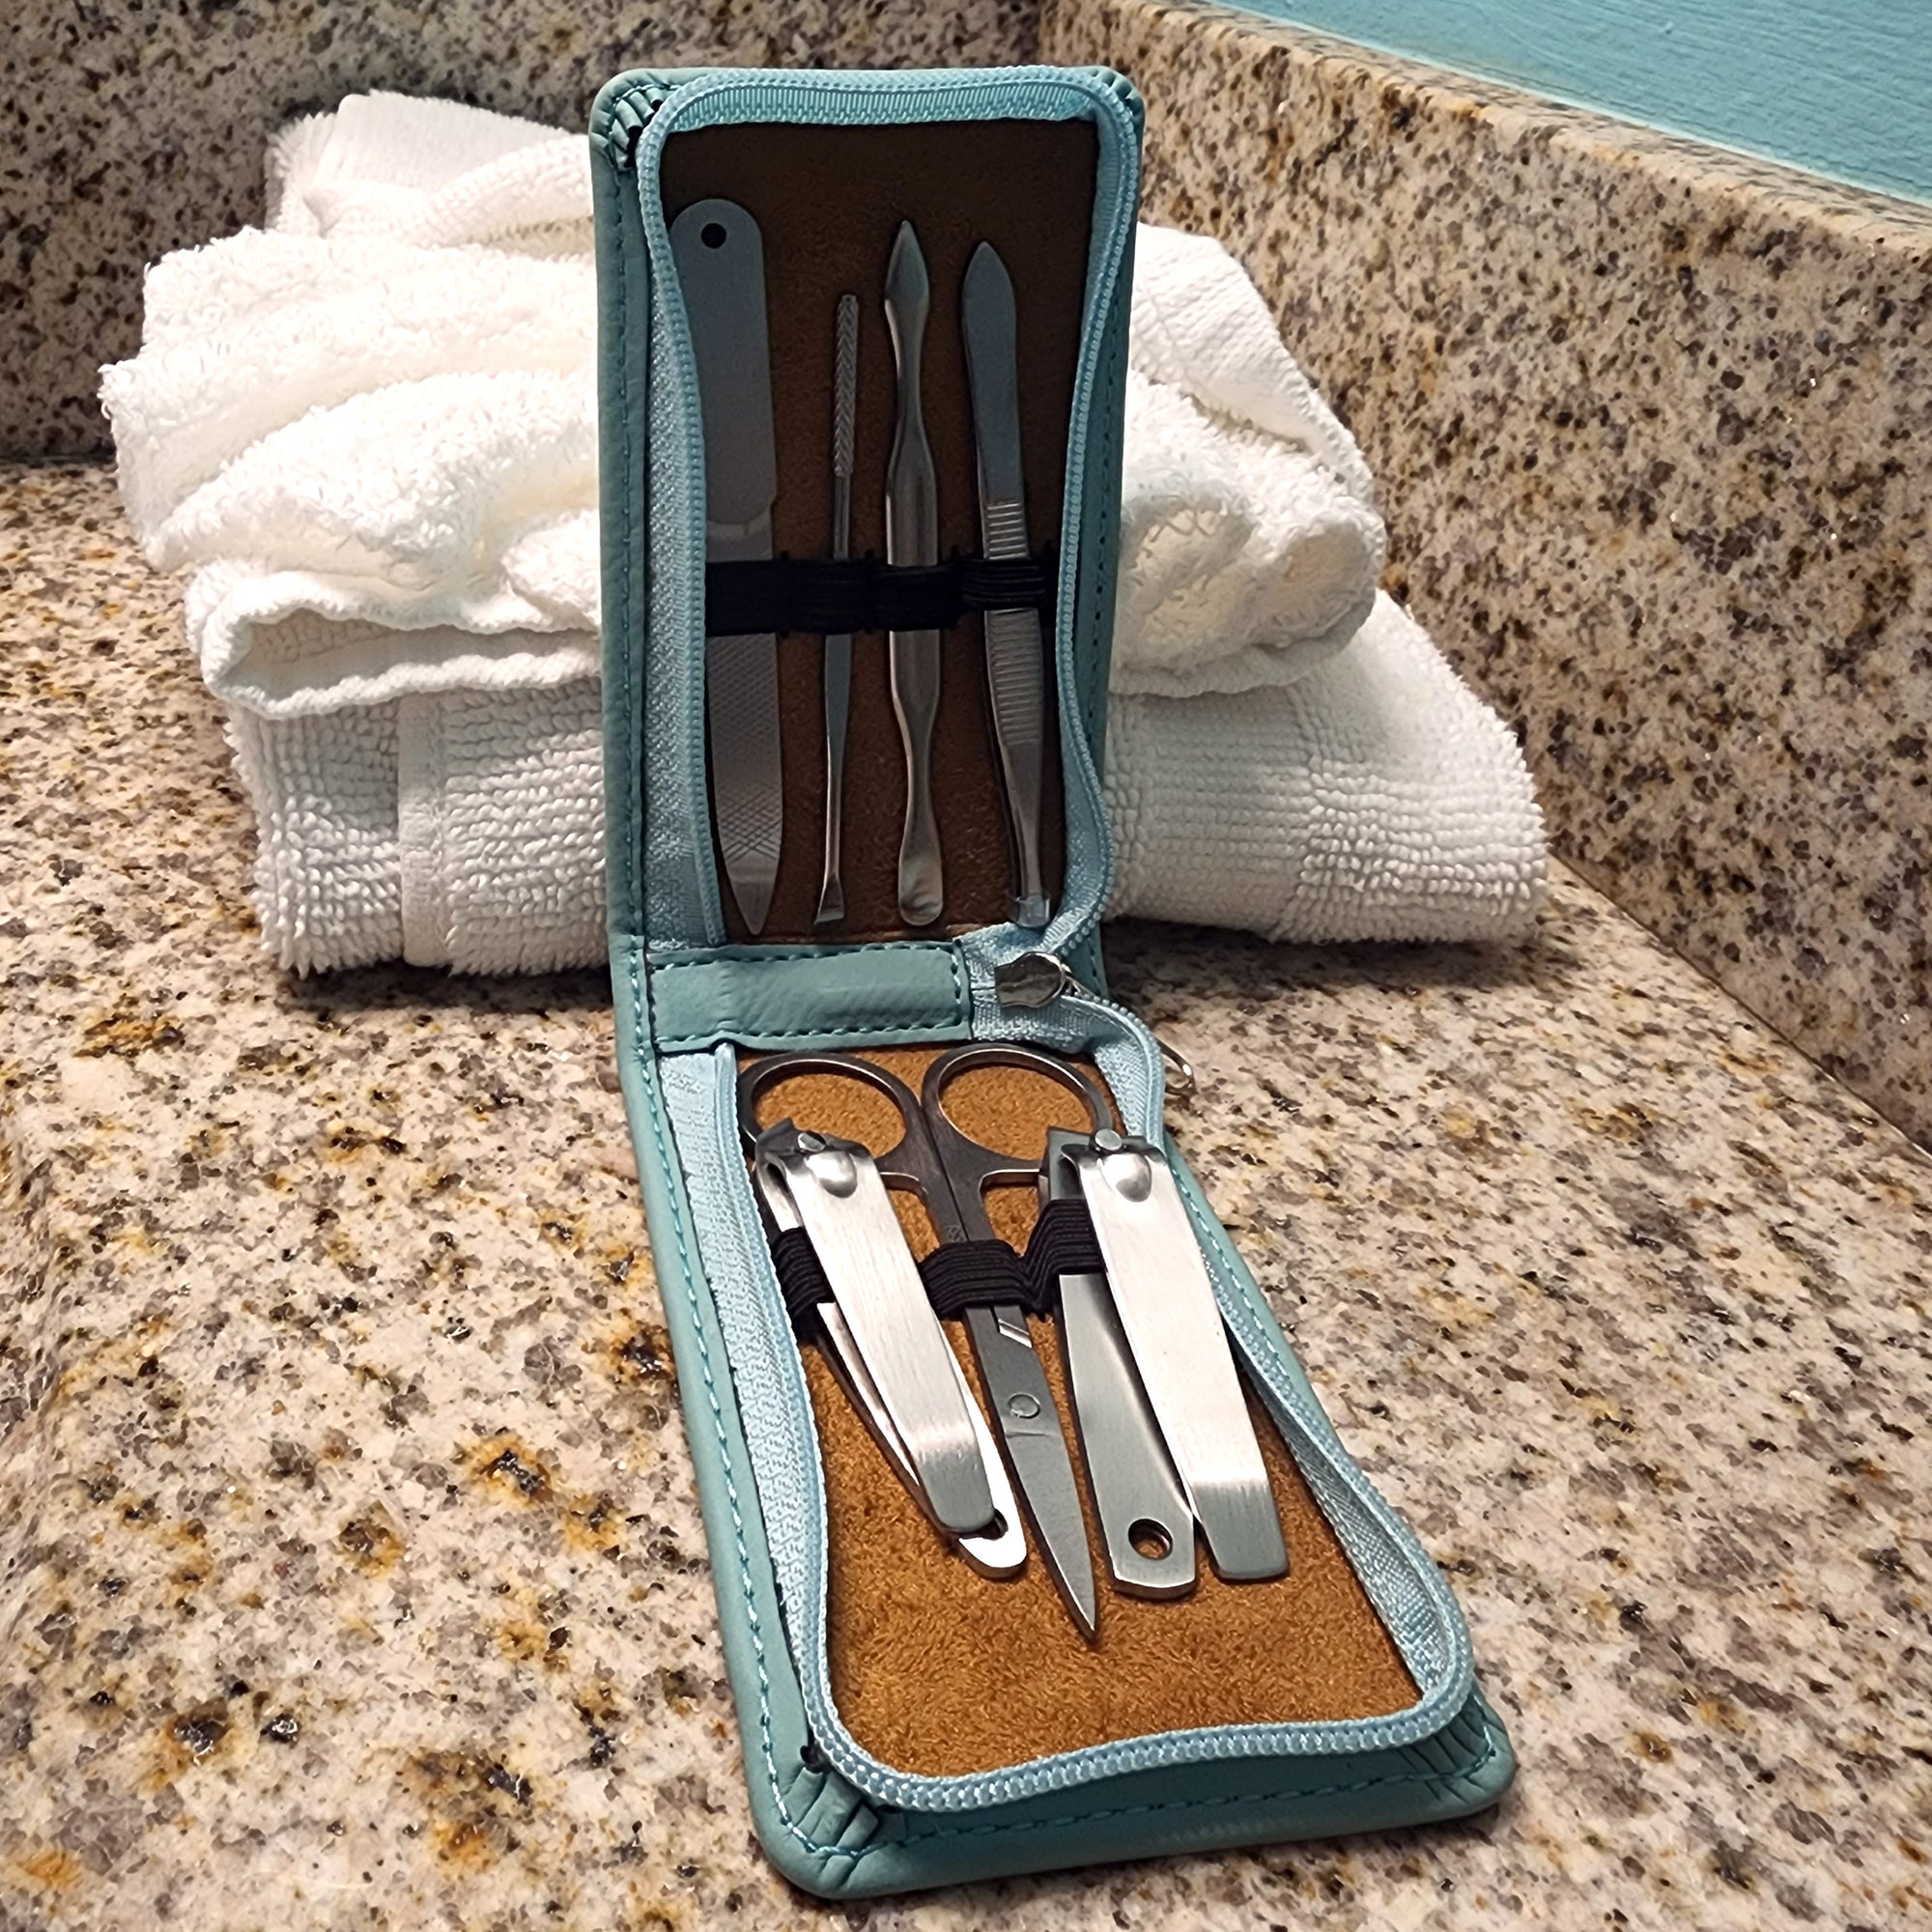 Leather Manicure Set - Customized with your Logo - Great for client gifts, merchandising - AirBnB STR VRBO